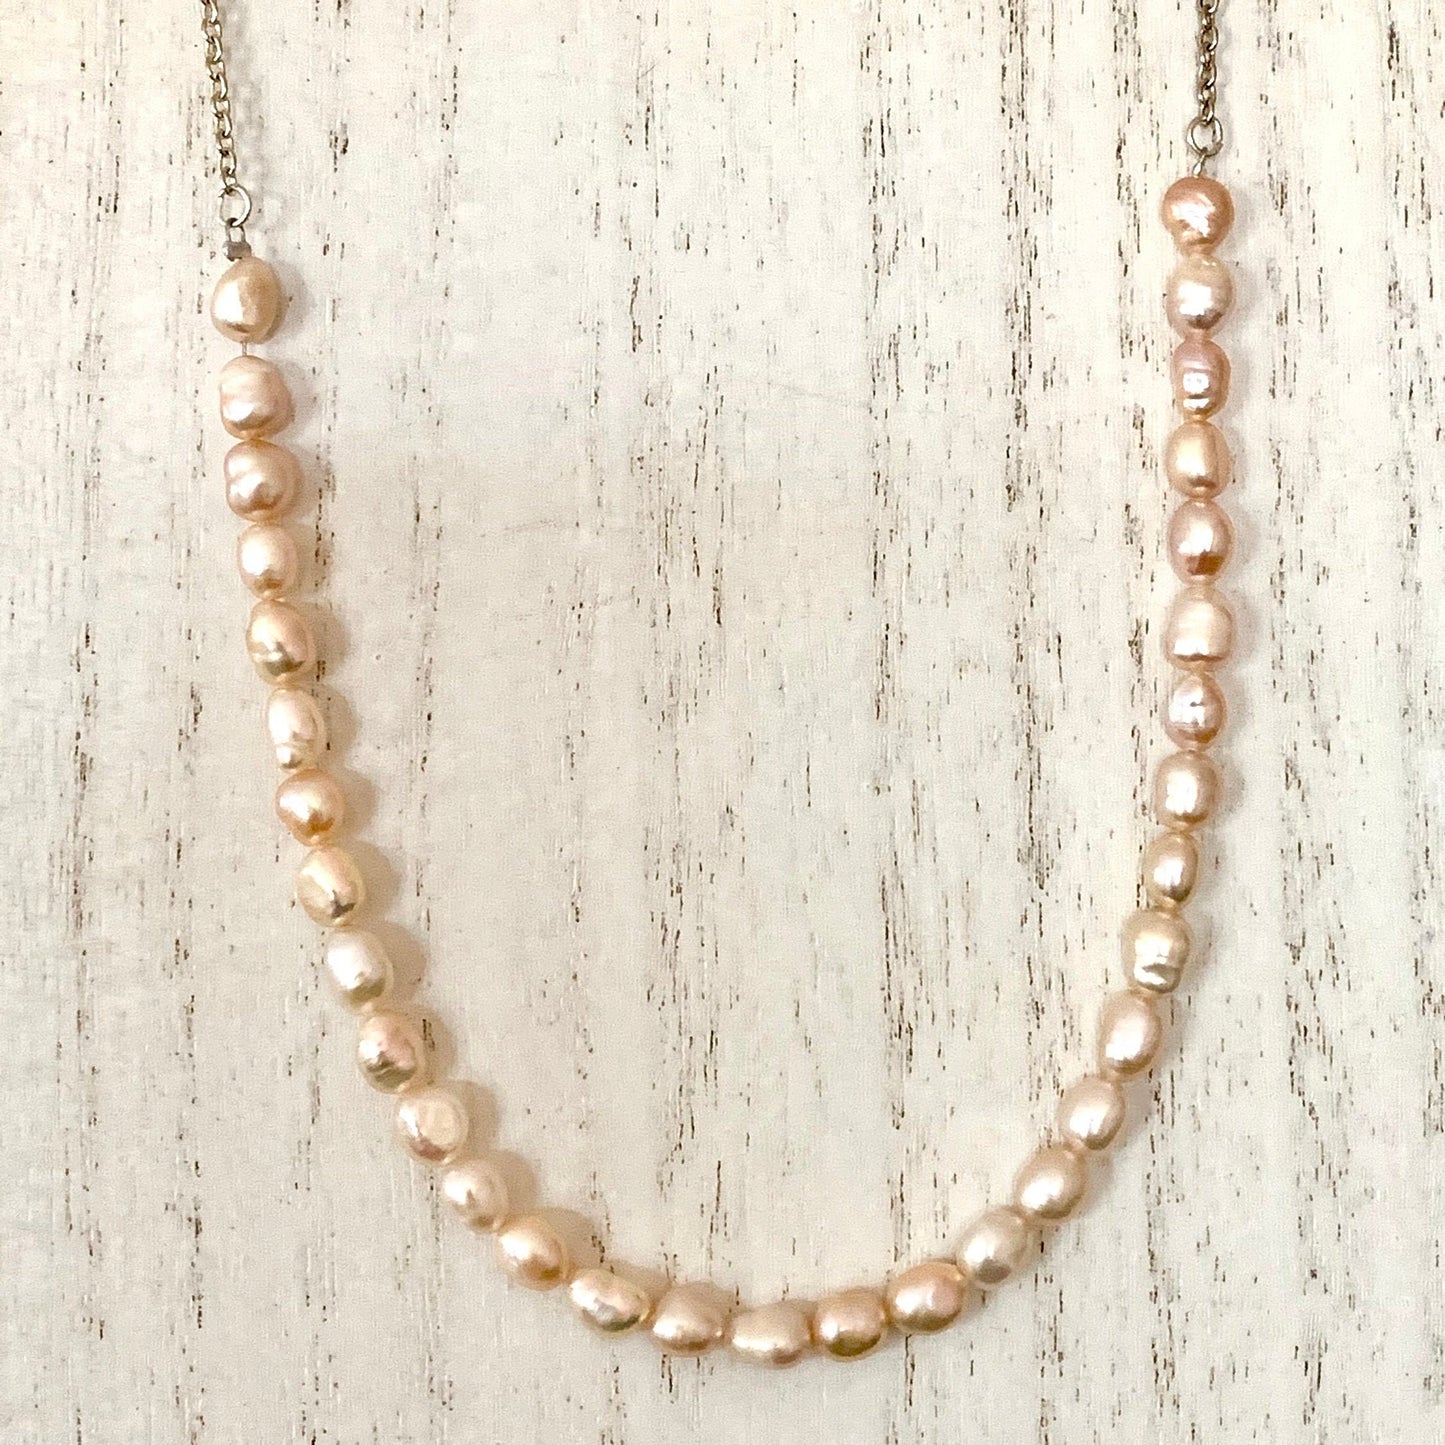 Pink Freshwater Pearl demi-strand,  attached to  from silver chain.